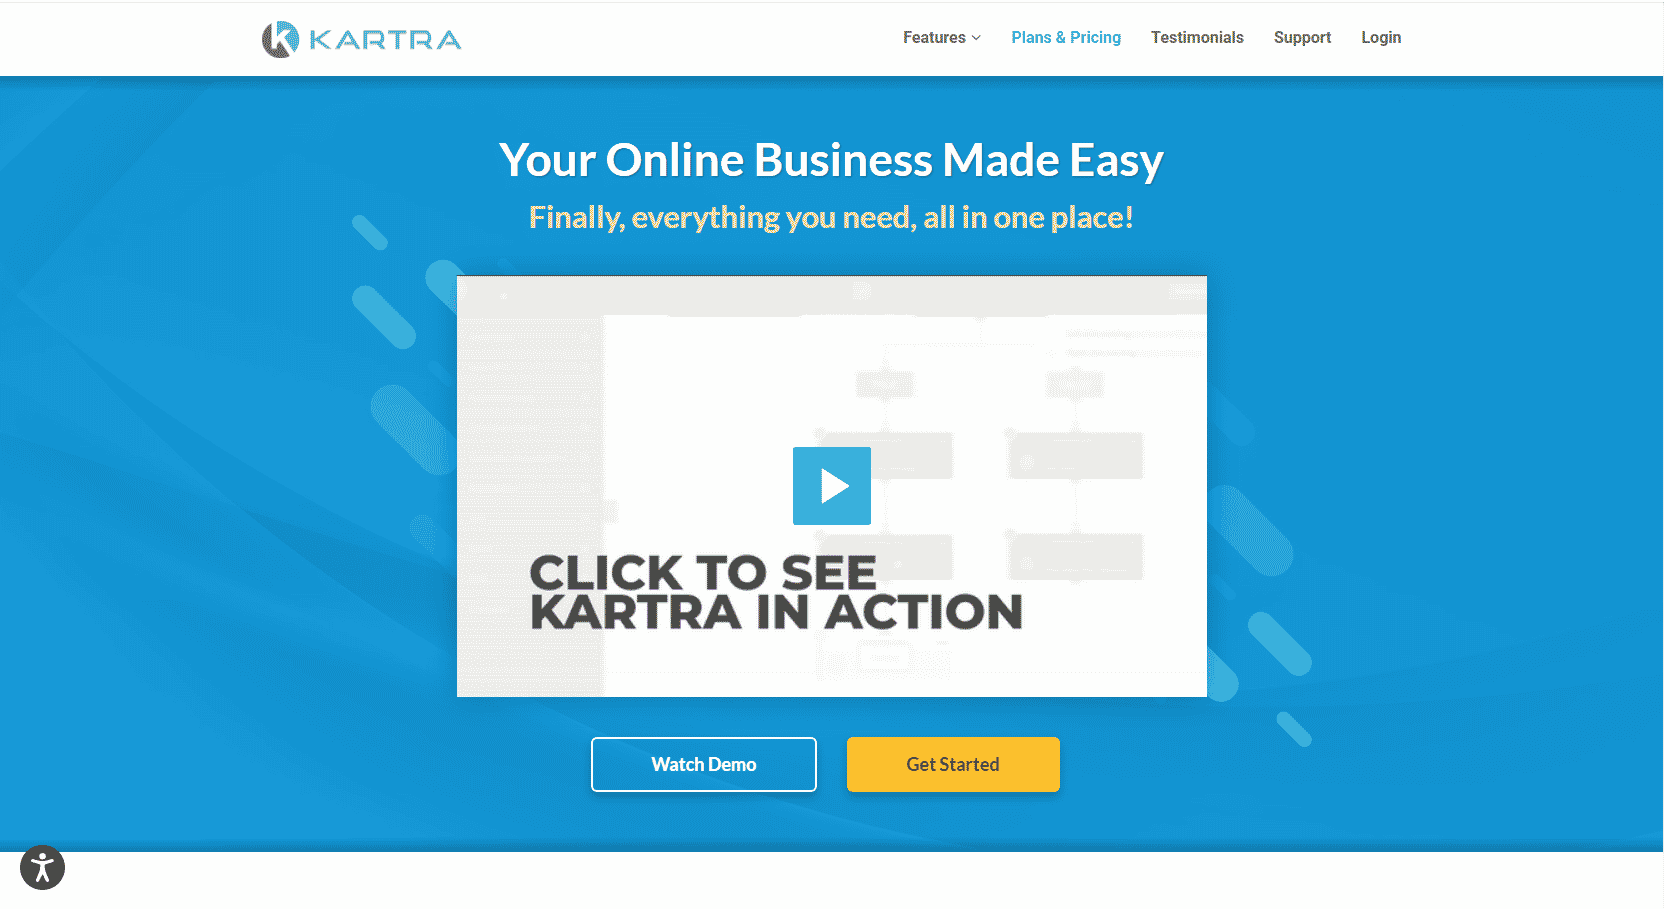 Kartra Marketing Automation Tool, Features, Pros, Cons, Pricing & Best Alternatives